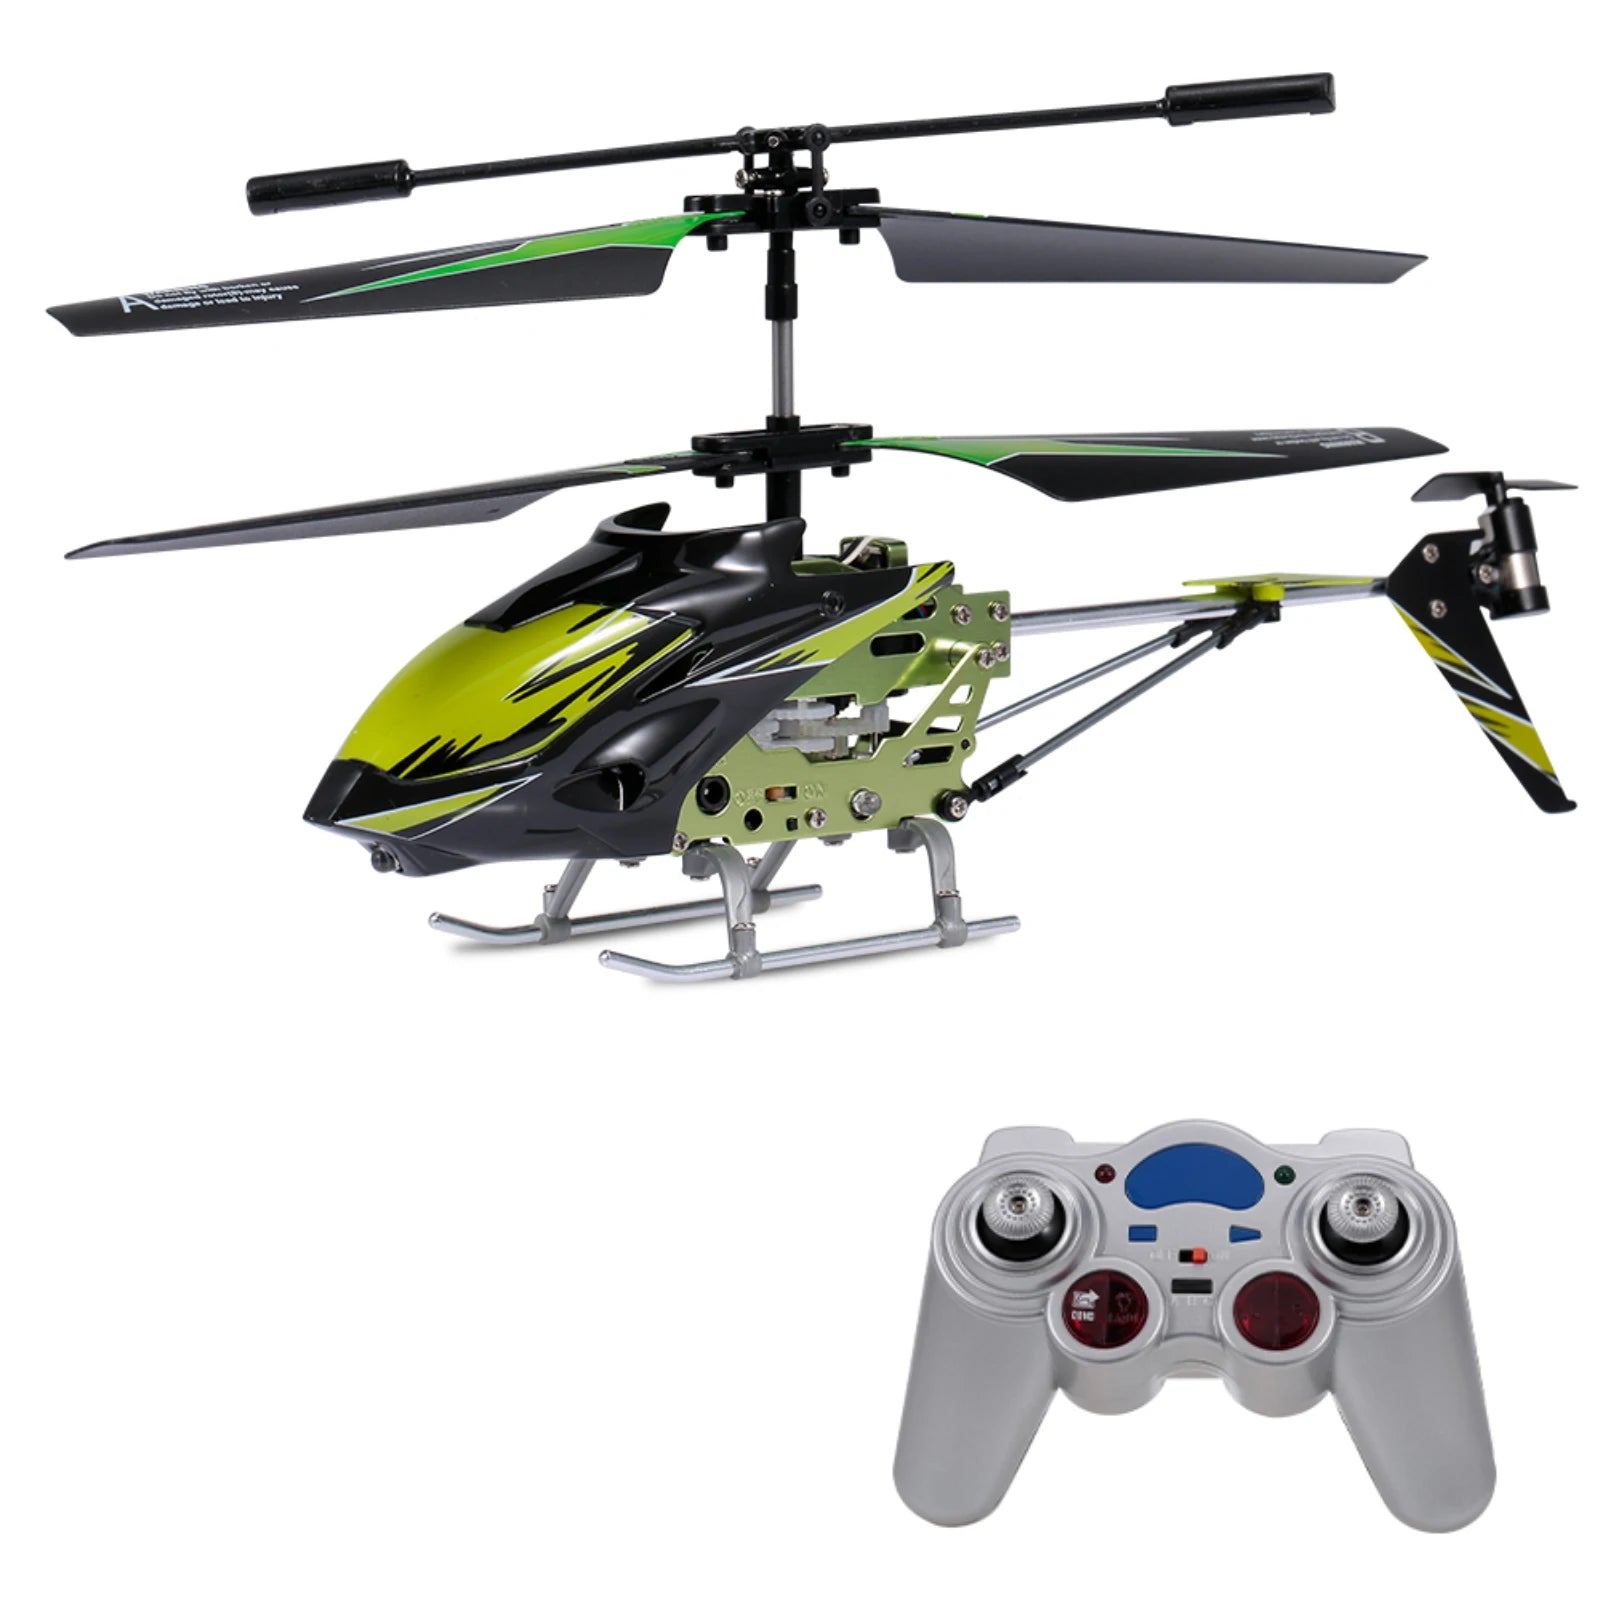 Wltoys XK S929-A RC Helicopter, the use of ABS in aircraft can improve its anti-collision and anti-collapse